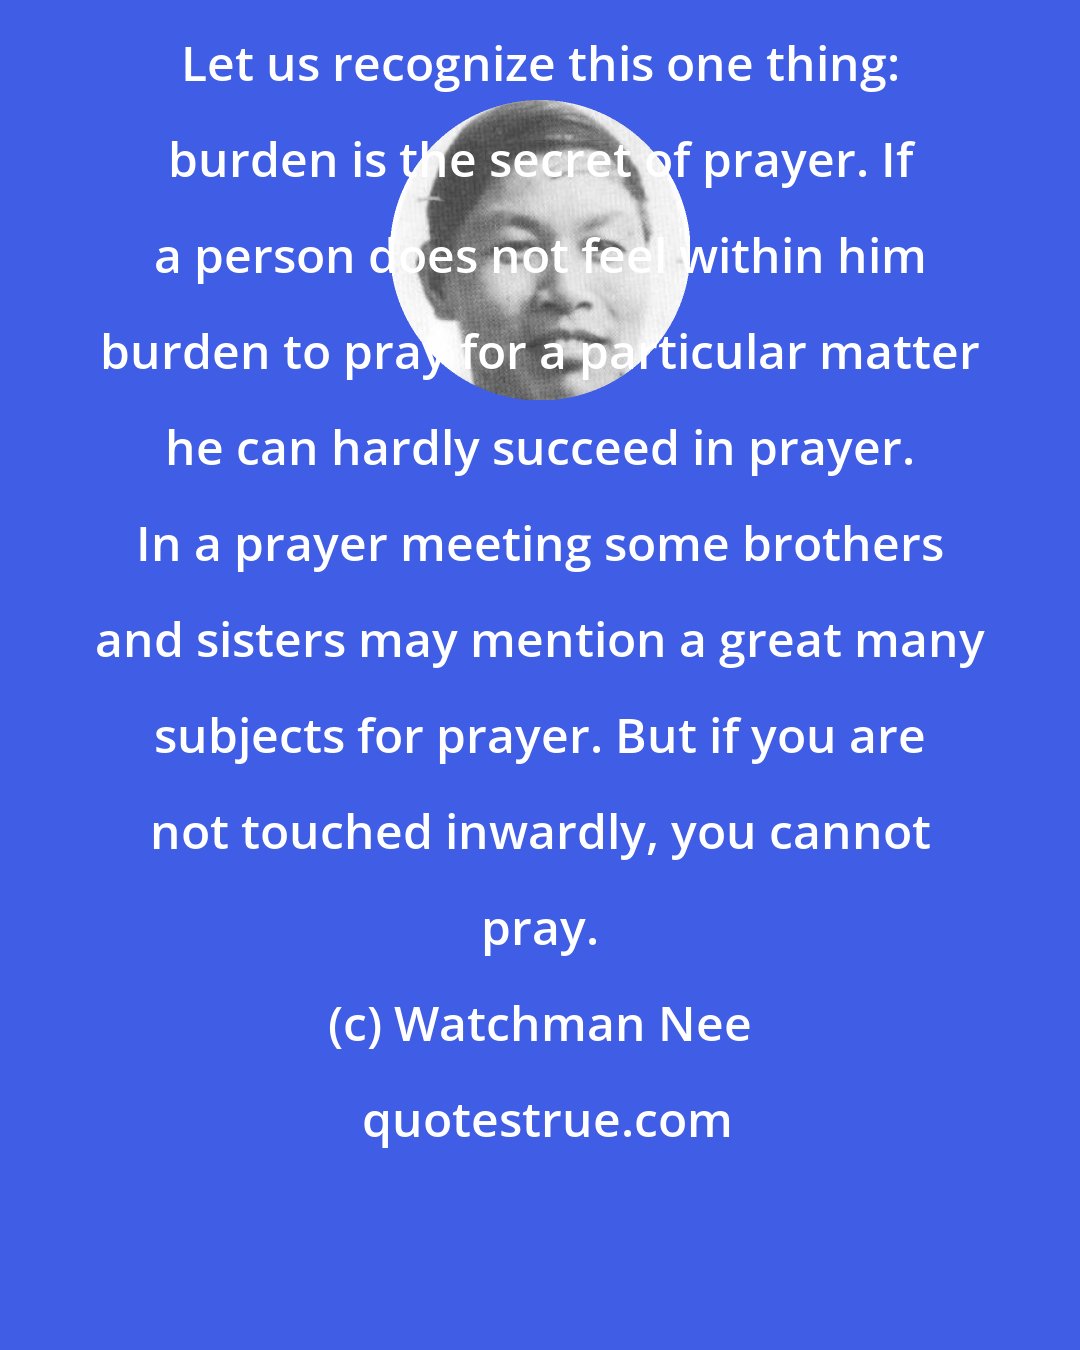 Watchman Nee: Let us recognize this one thing: burden is the secret of prayer. If a person does not feel within him burden to pray for a particular matter he can hardly succeed in prayer. In a prayer meeting some brothers and sisters may mention a great many subjects for prayer. But if you are not touched inwardly, you cannot pray.